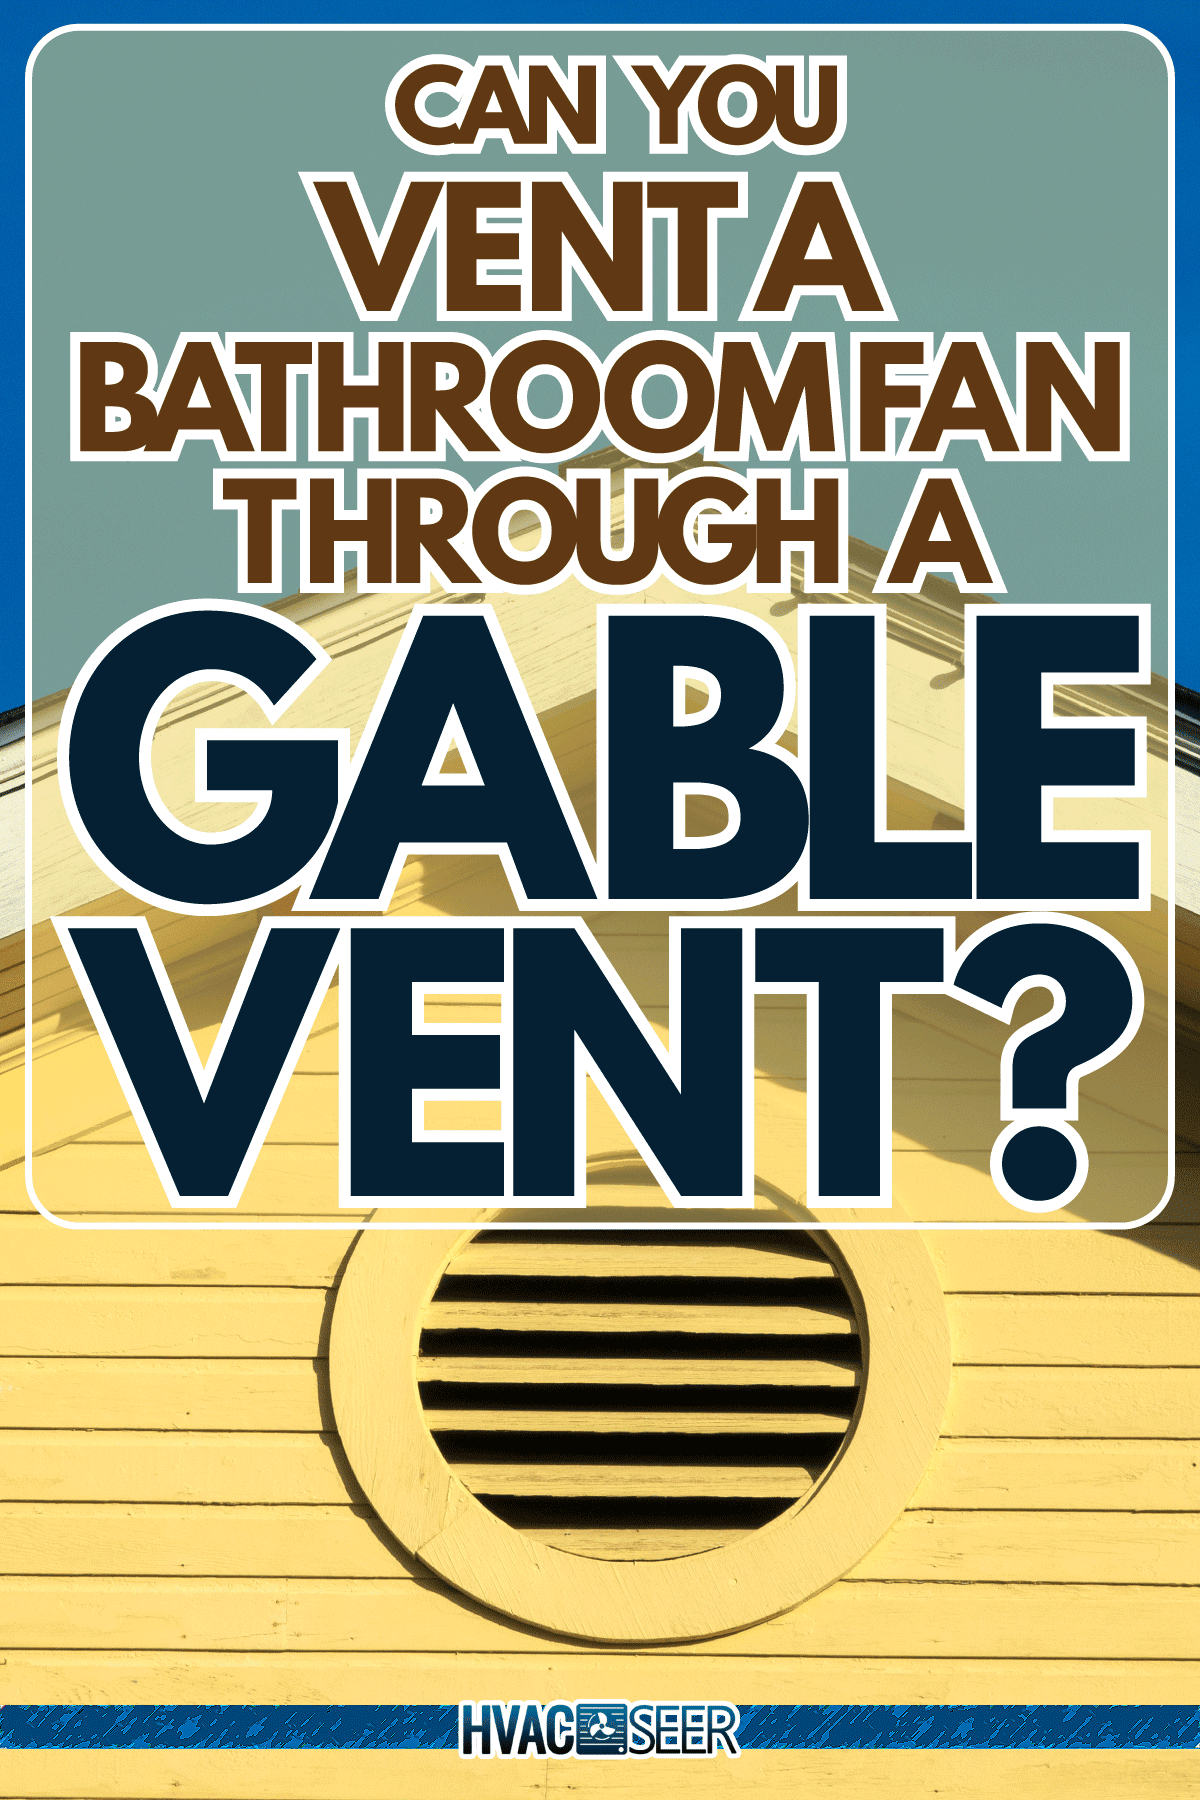 A gable vent in a yellow wall, Can You Vent A Bathroom Fan Through A Gable Vent?